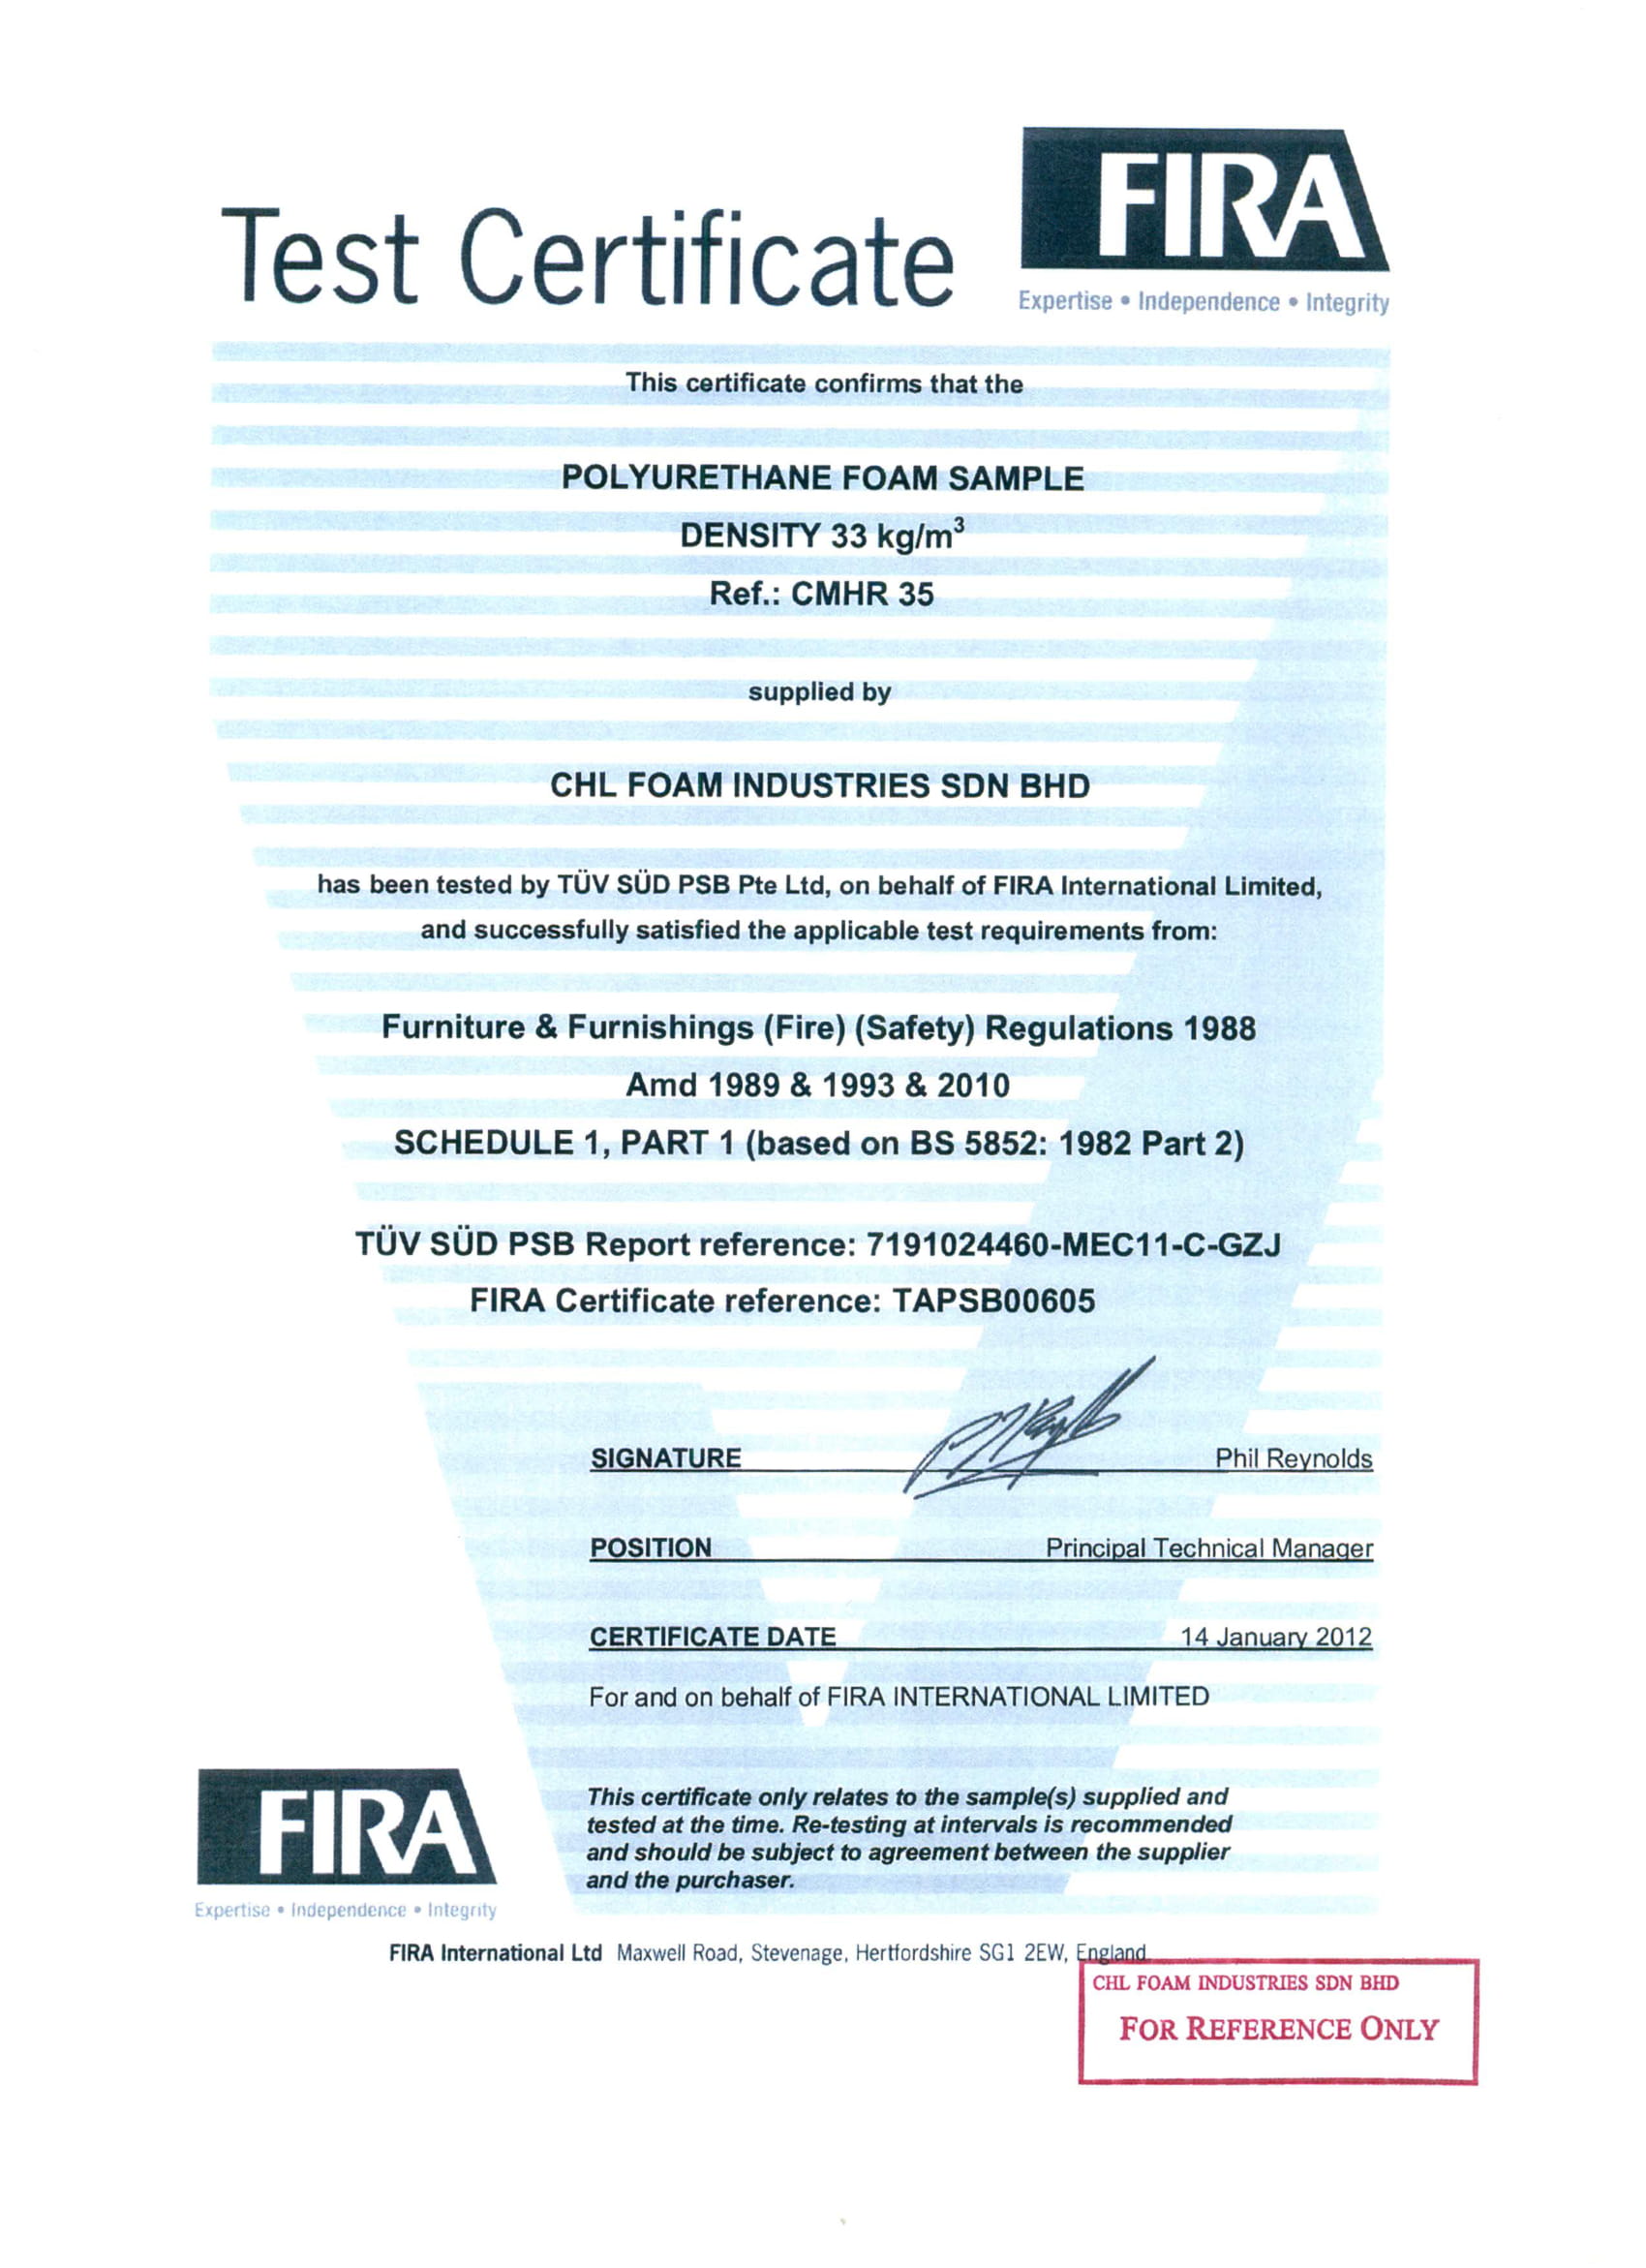 Test Certificate by FIRA - Polyurethane Foam (Furniture & Furnishings (Fire) (Safety) Regulations 1988